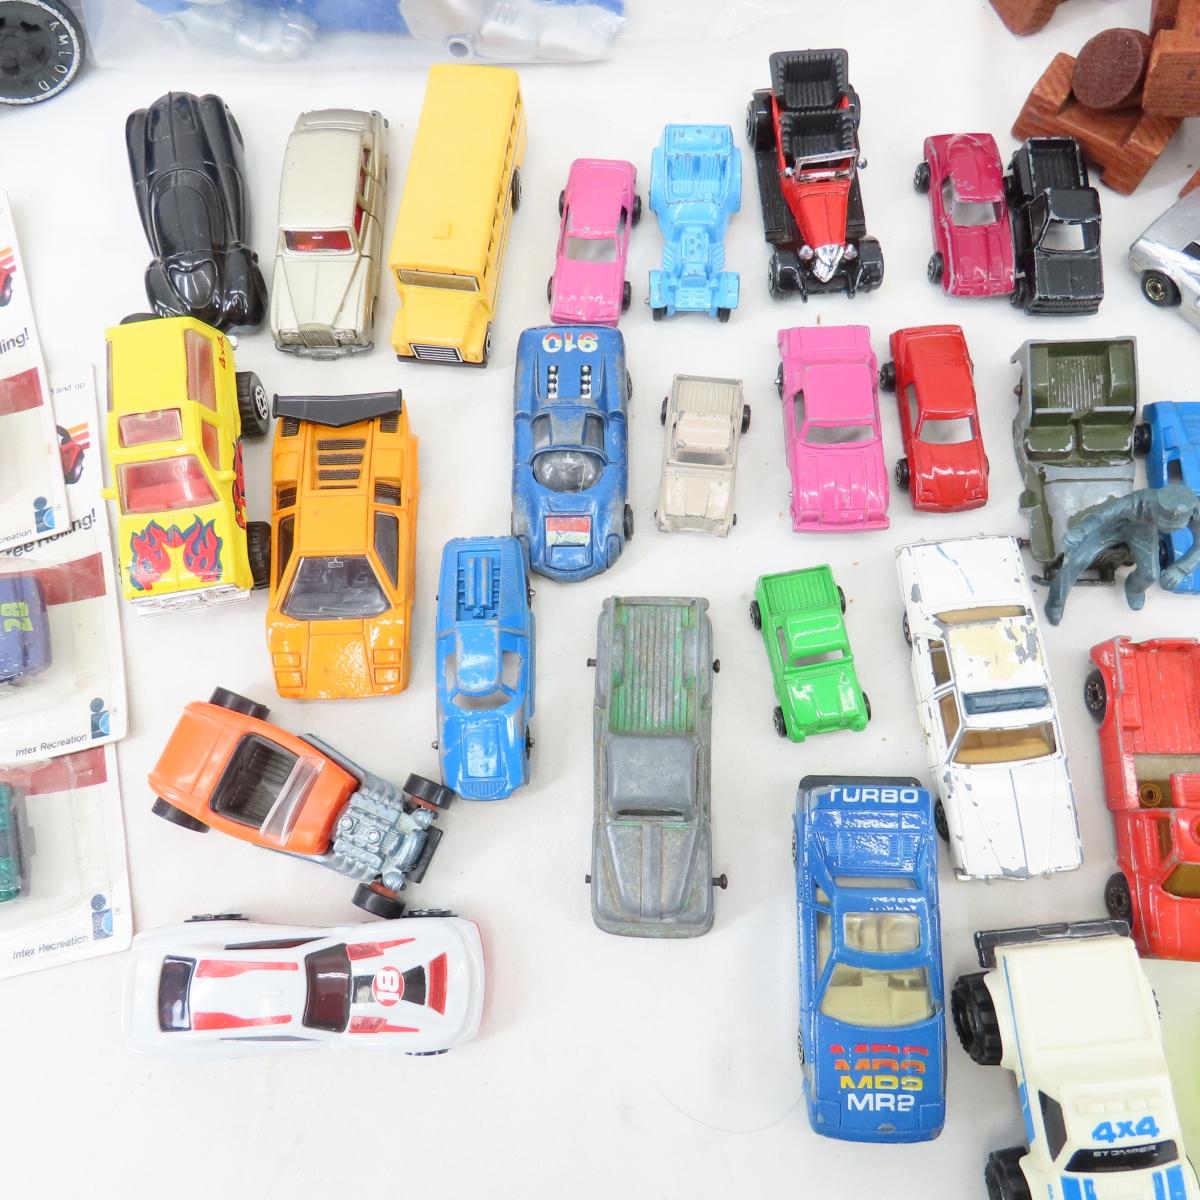 1:64 scale Diecast, Lincoln Logs, and more